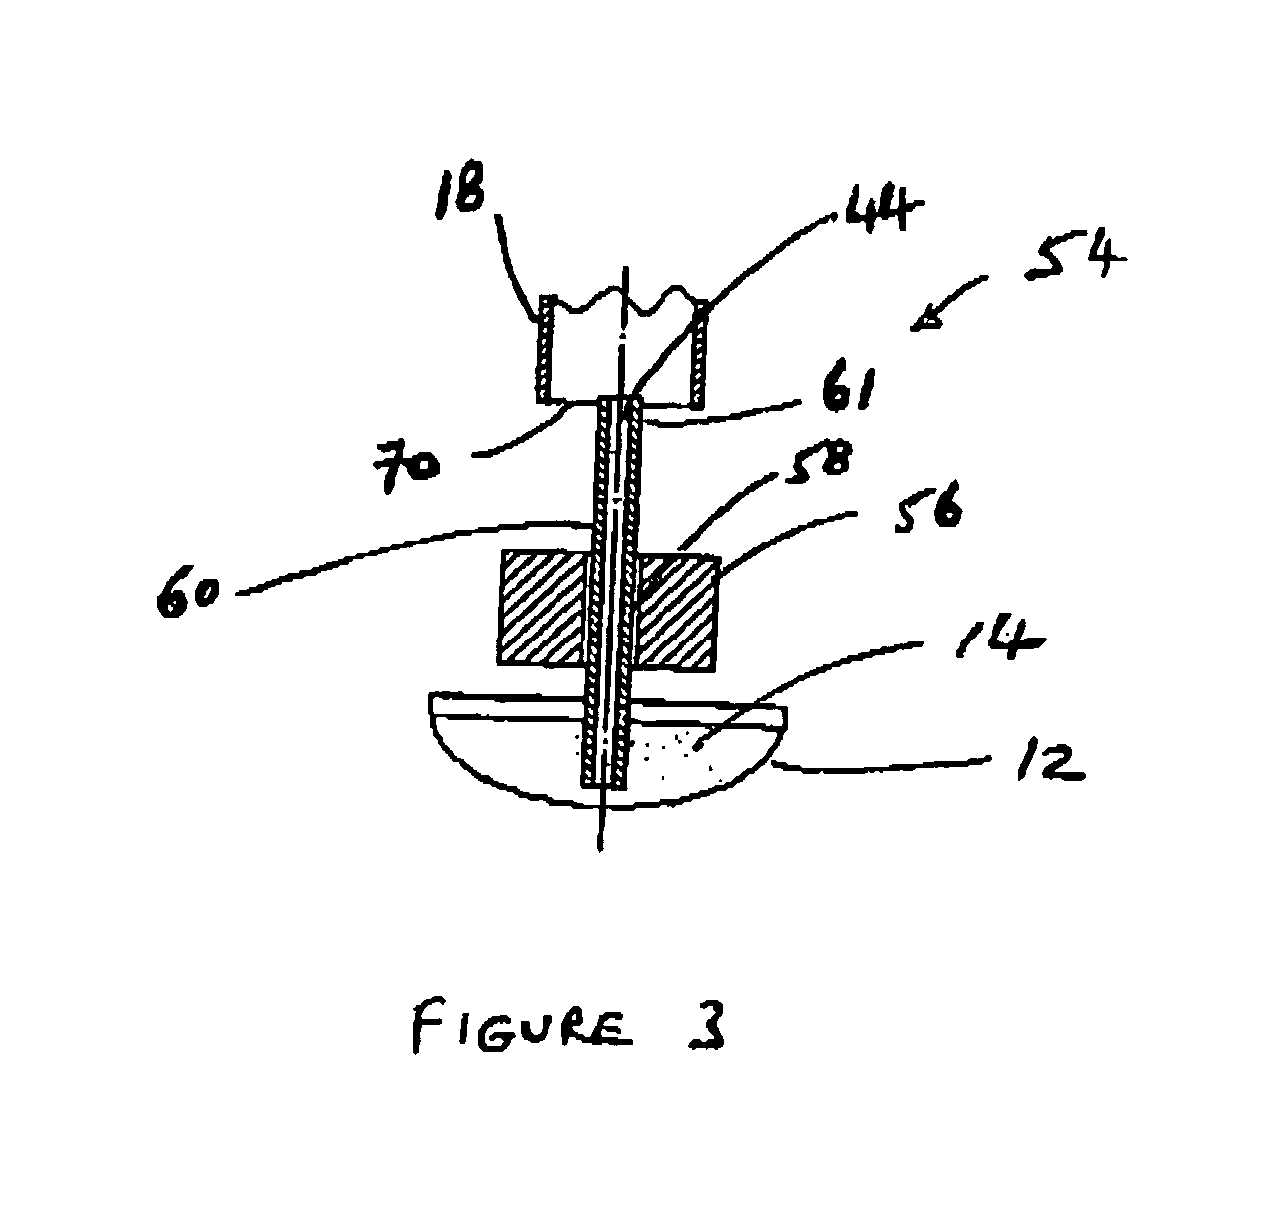 Nebulizing and drug delivery device